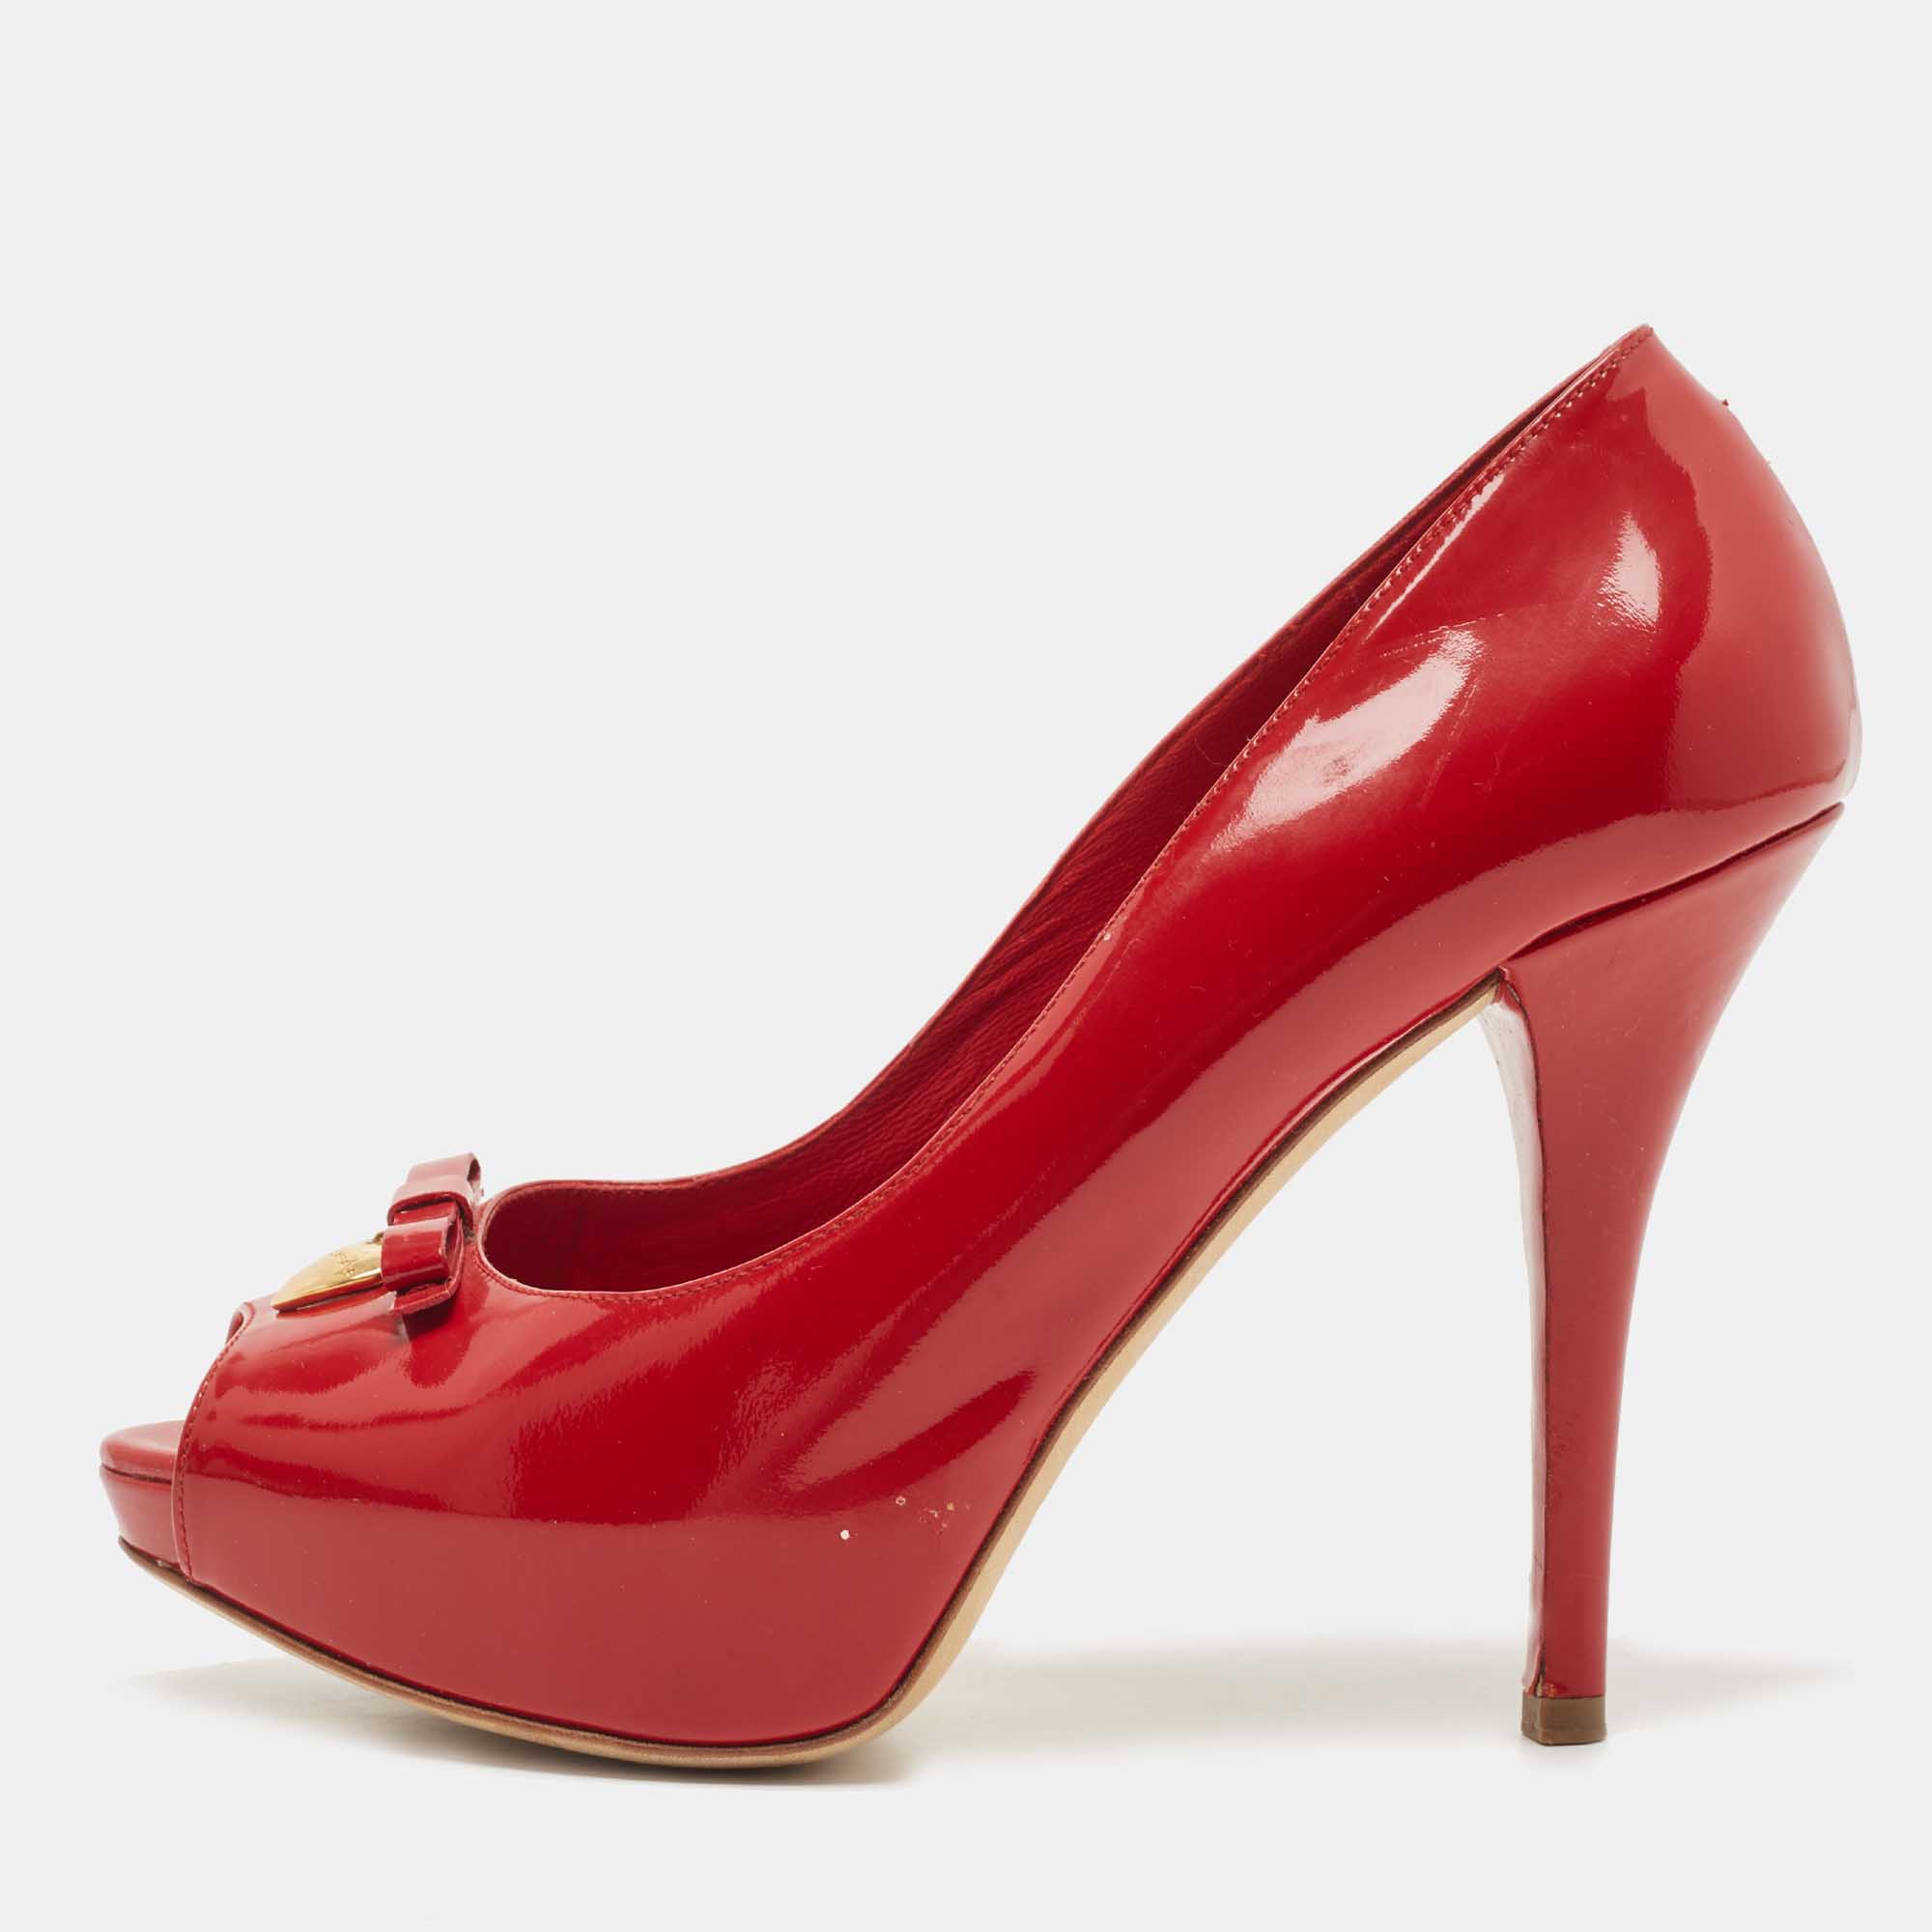 Pre-owned Dolce & Gabbana Red Patent Leather Bow Peep Toe Platform Pumps Size 38